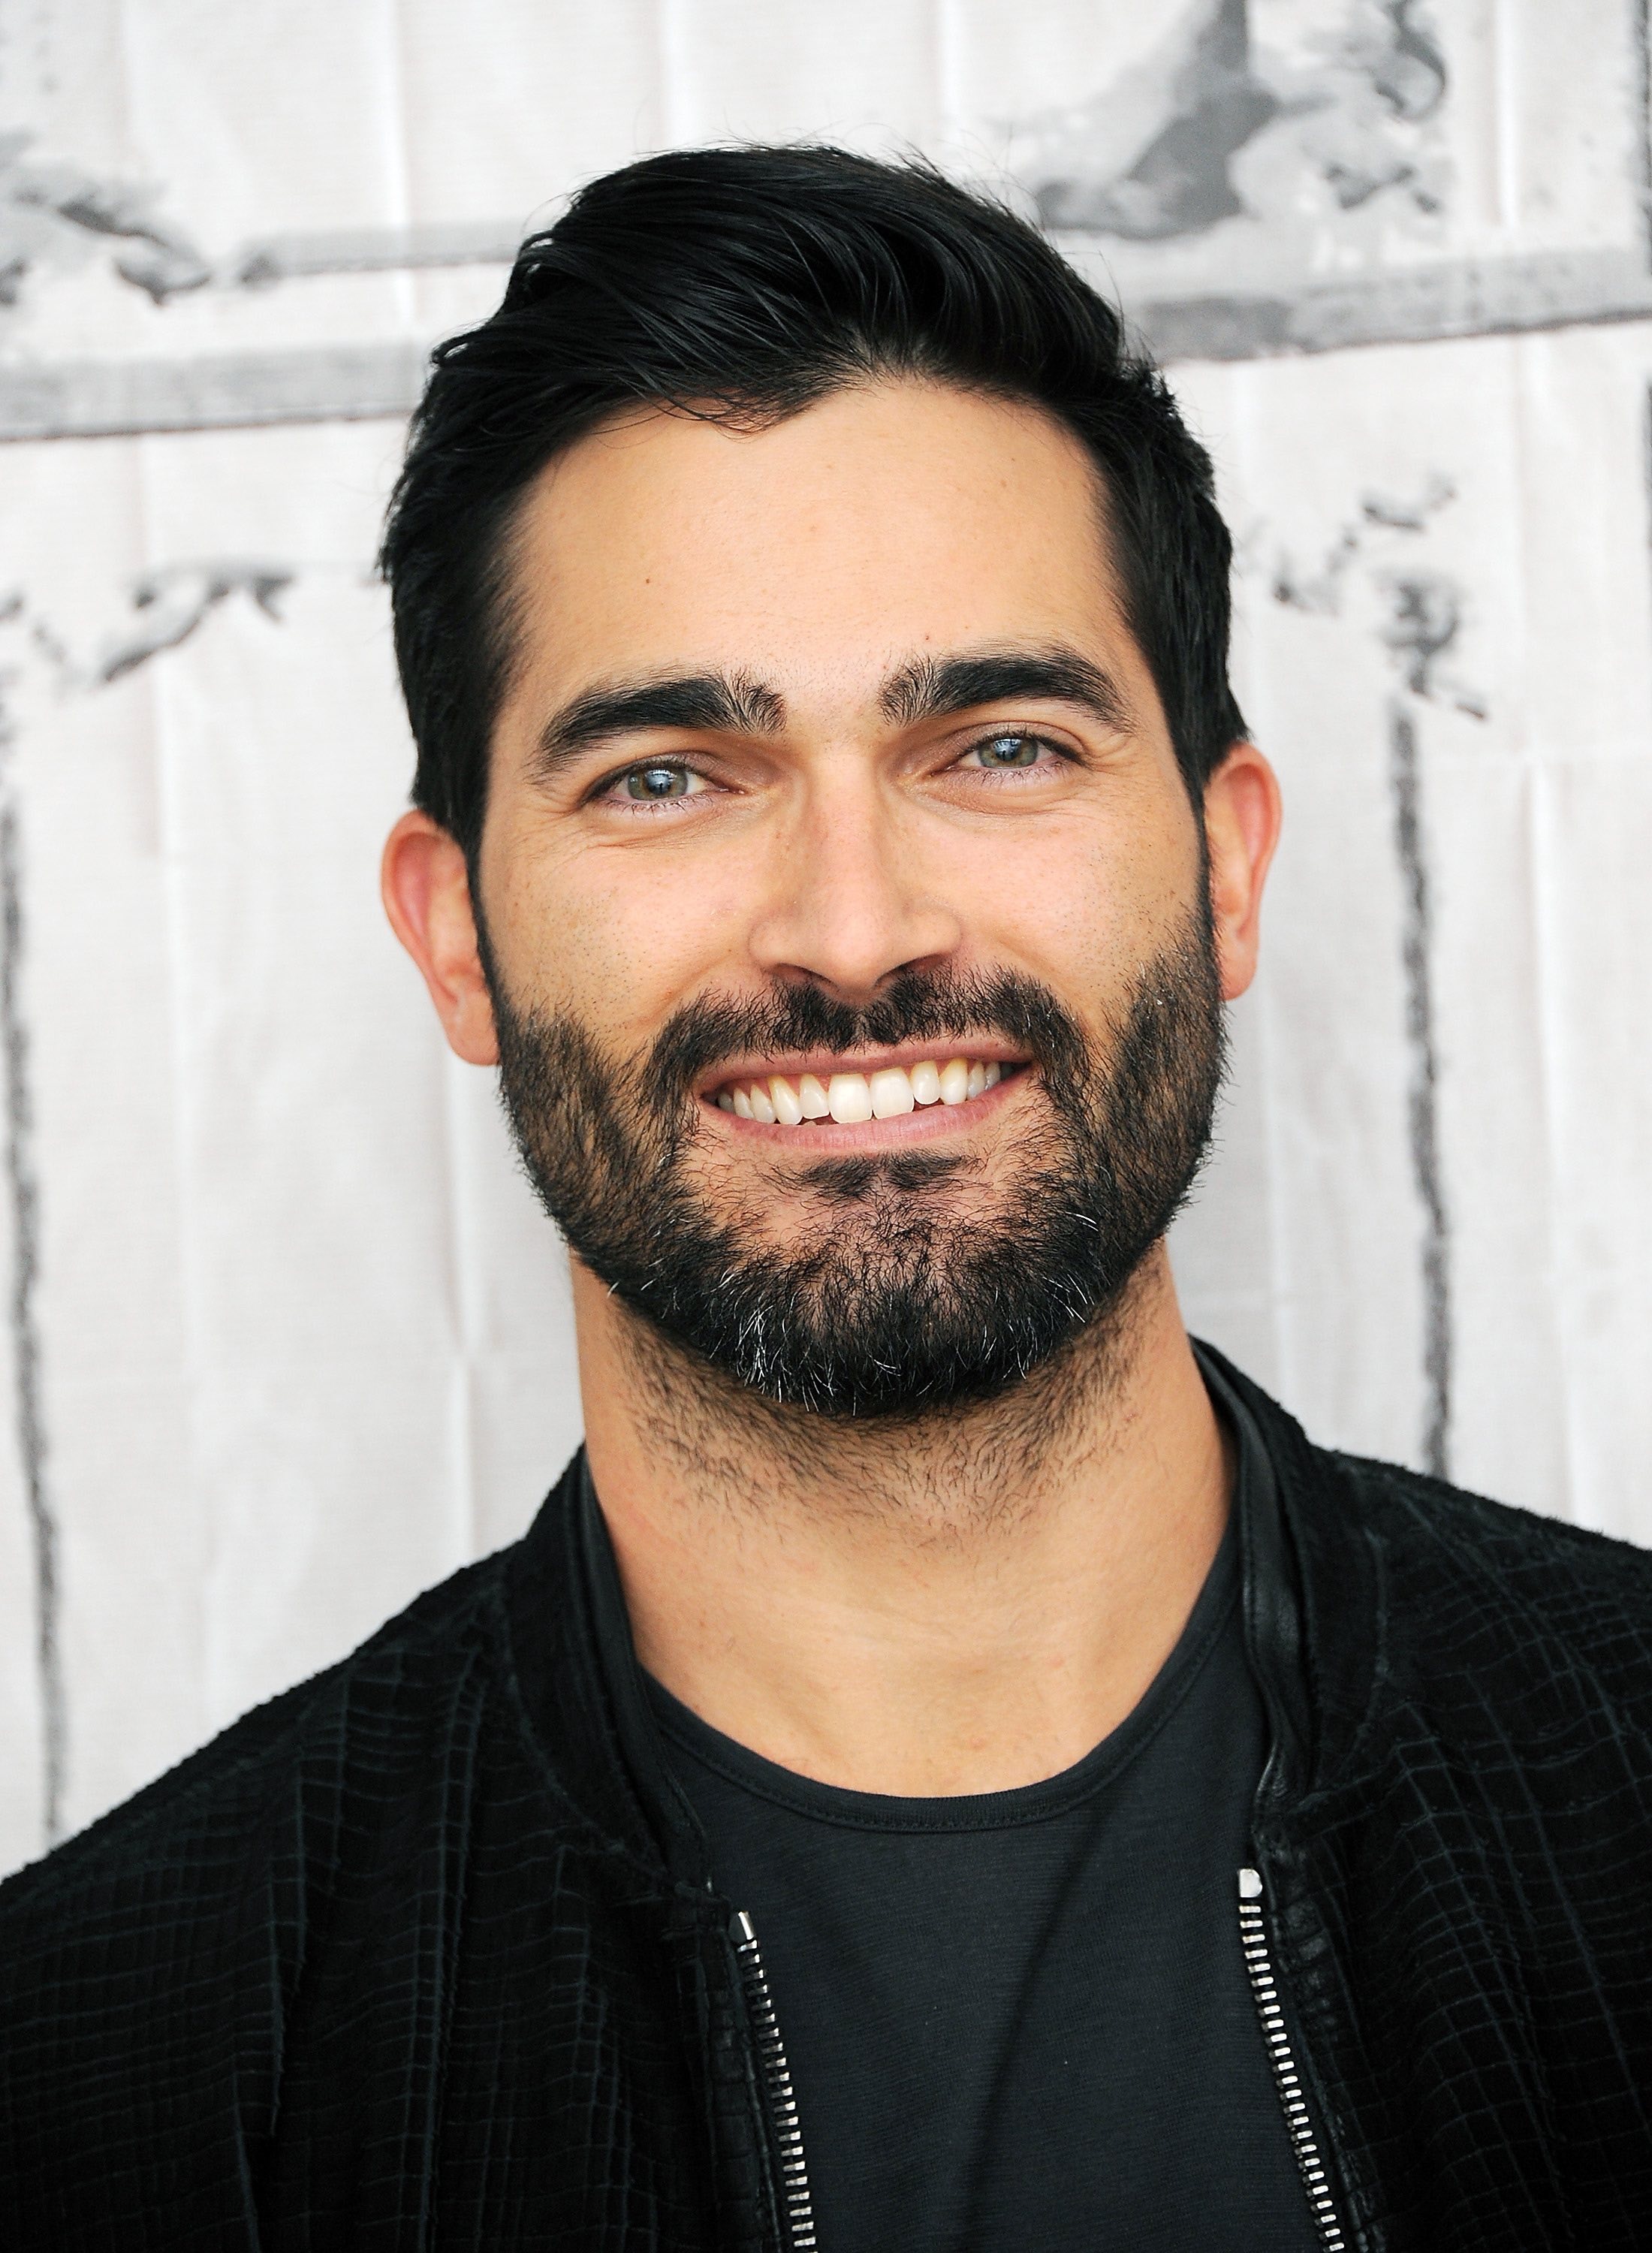 Tyler Hoechlin Central Photos: Click image to close this window